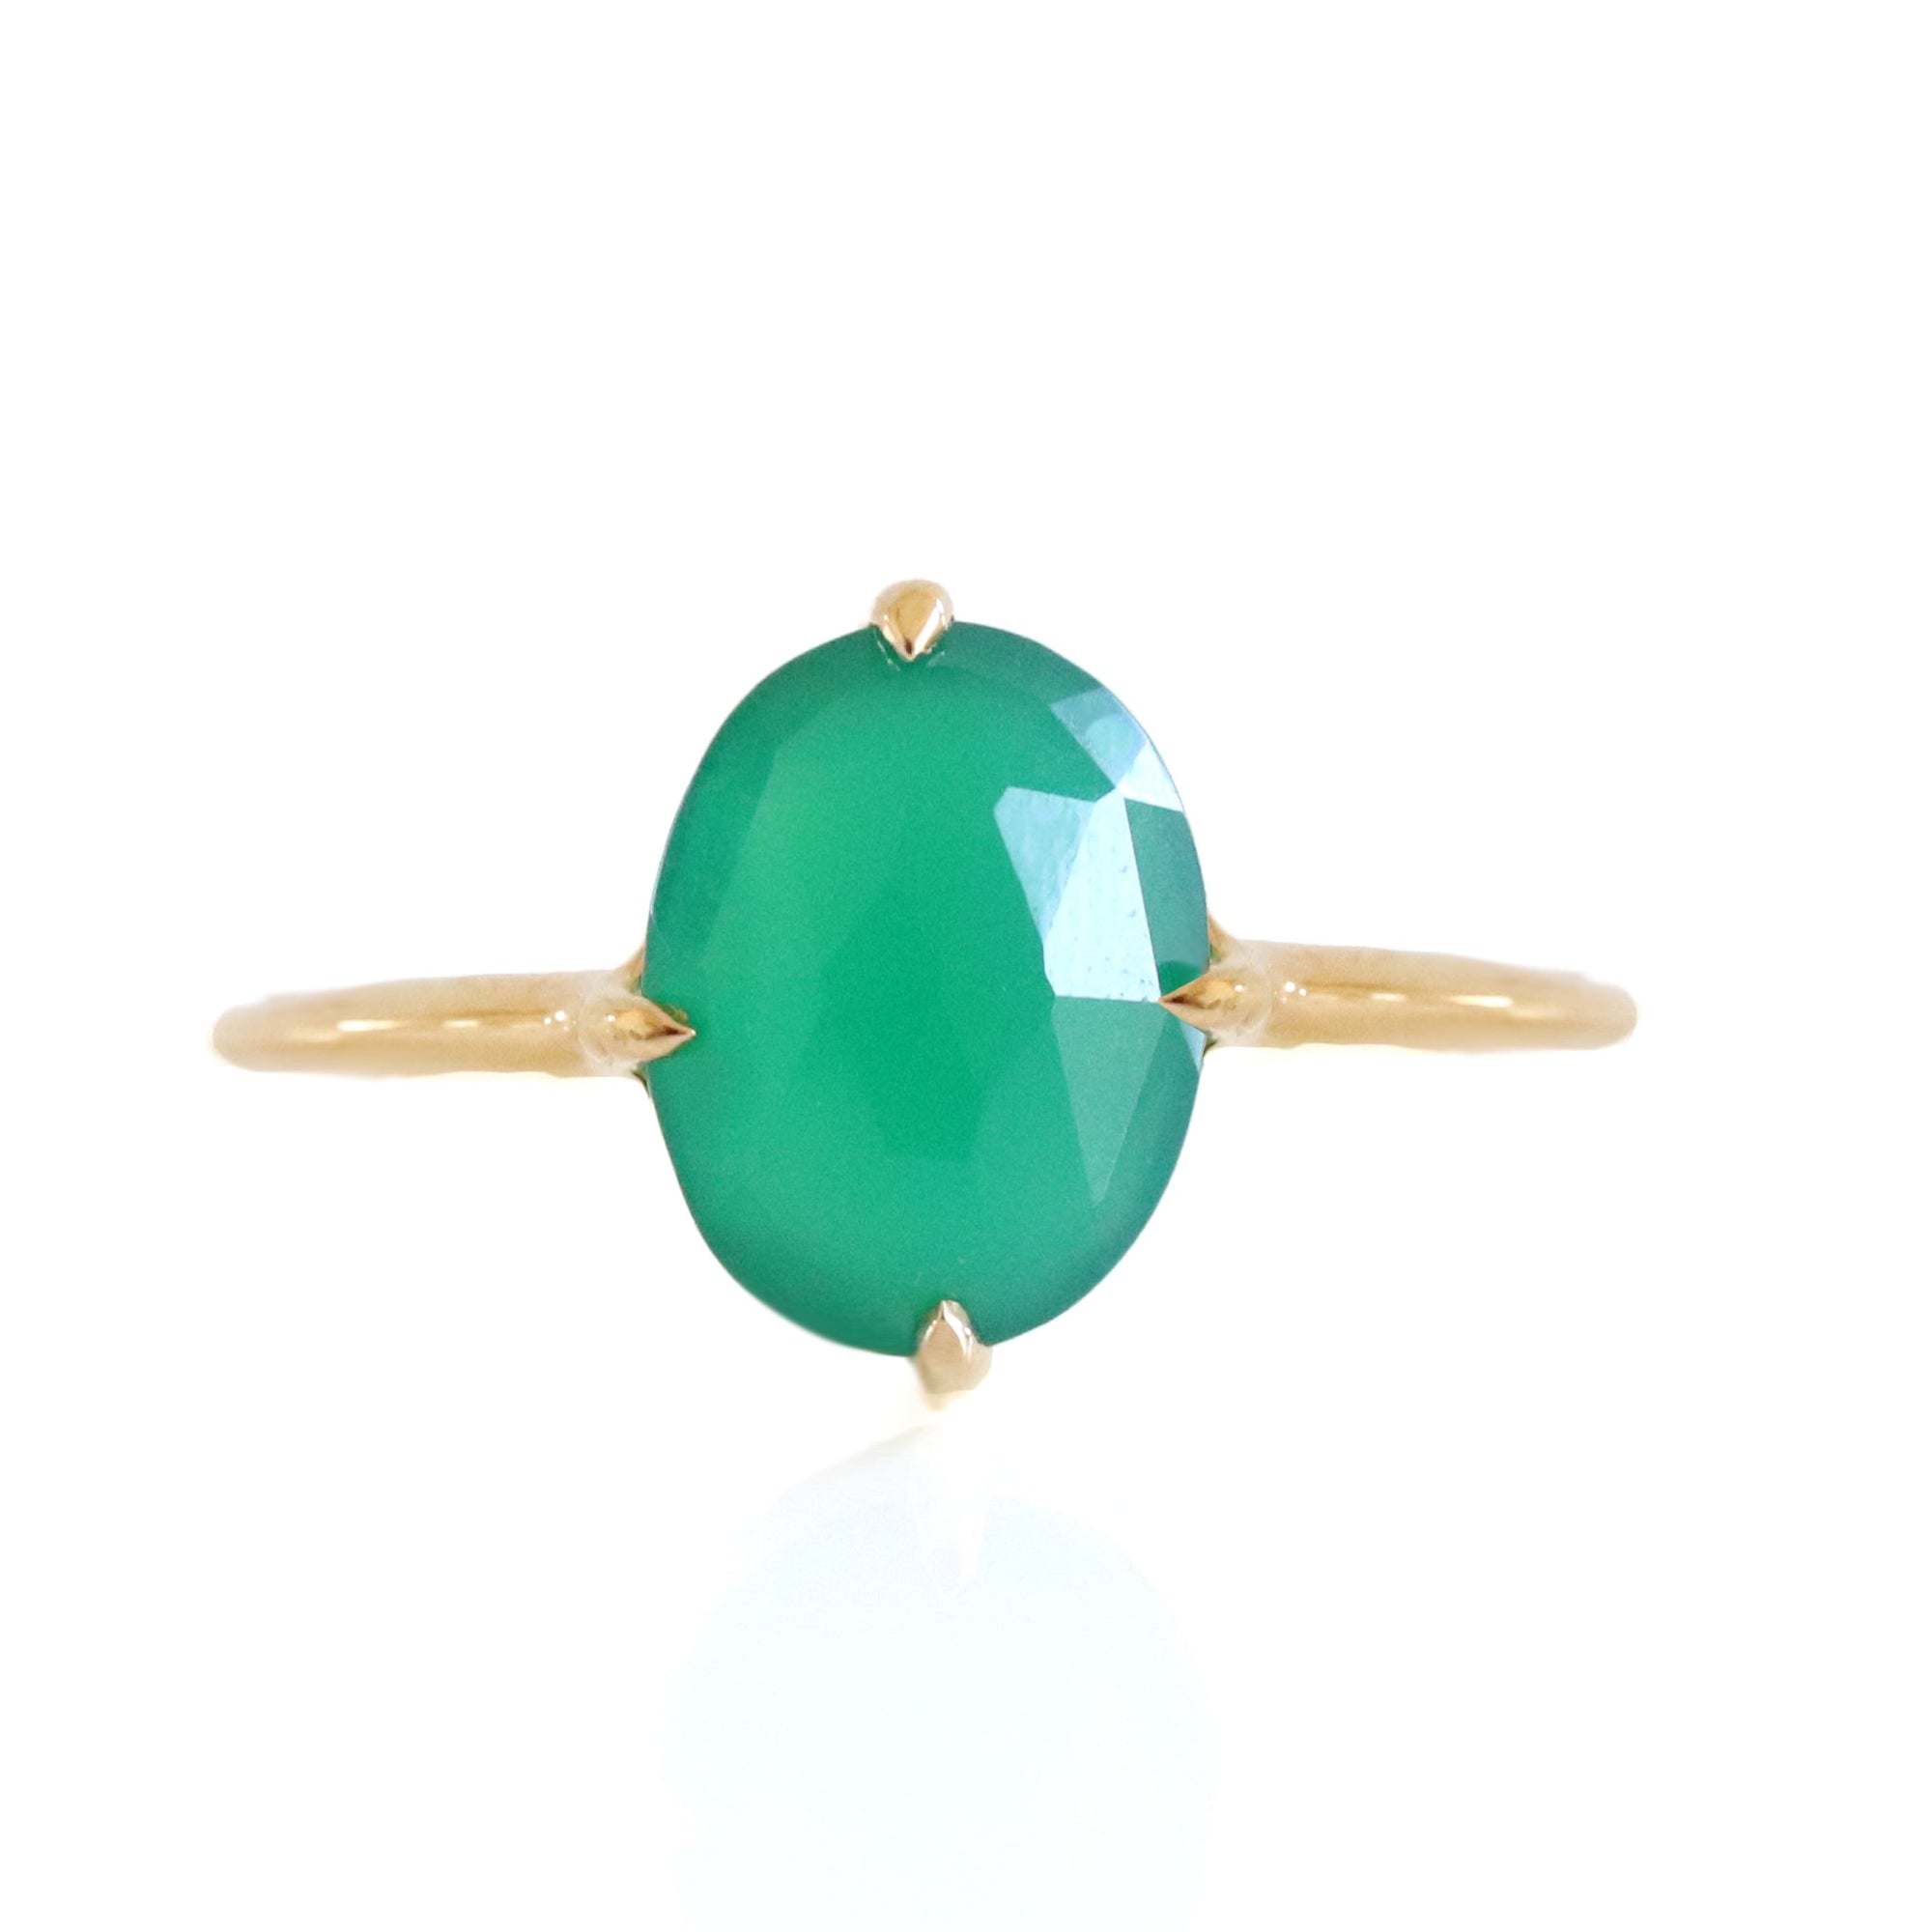 DAY 2 - KIND OVAL RING - EMERALD GREEN ONYX & GOLD - SO PRETTY CARA COTTER